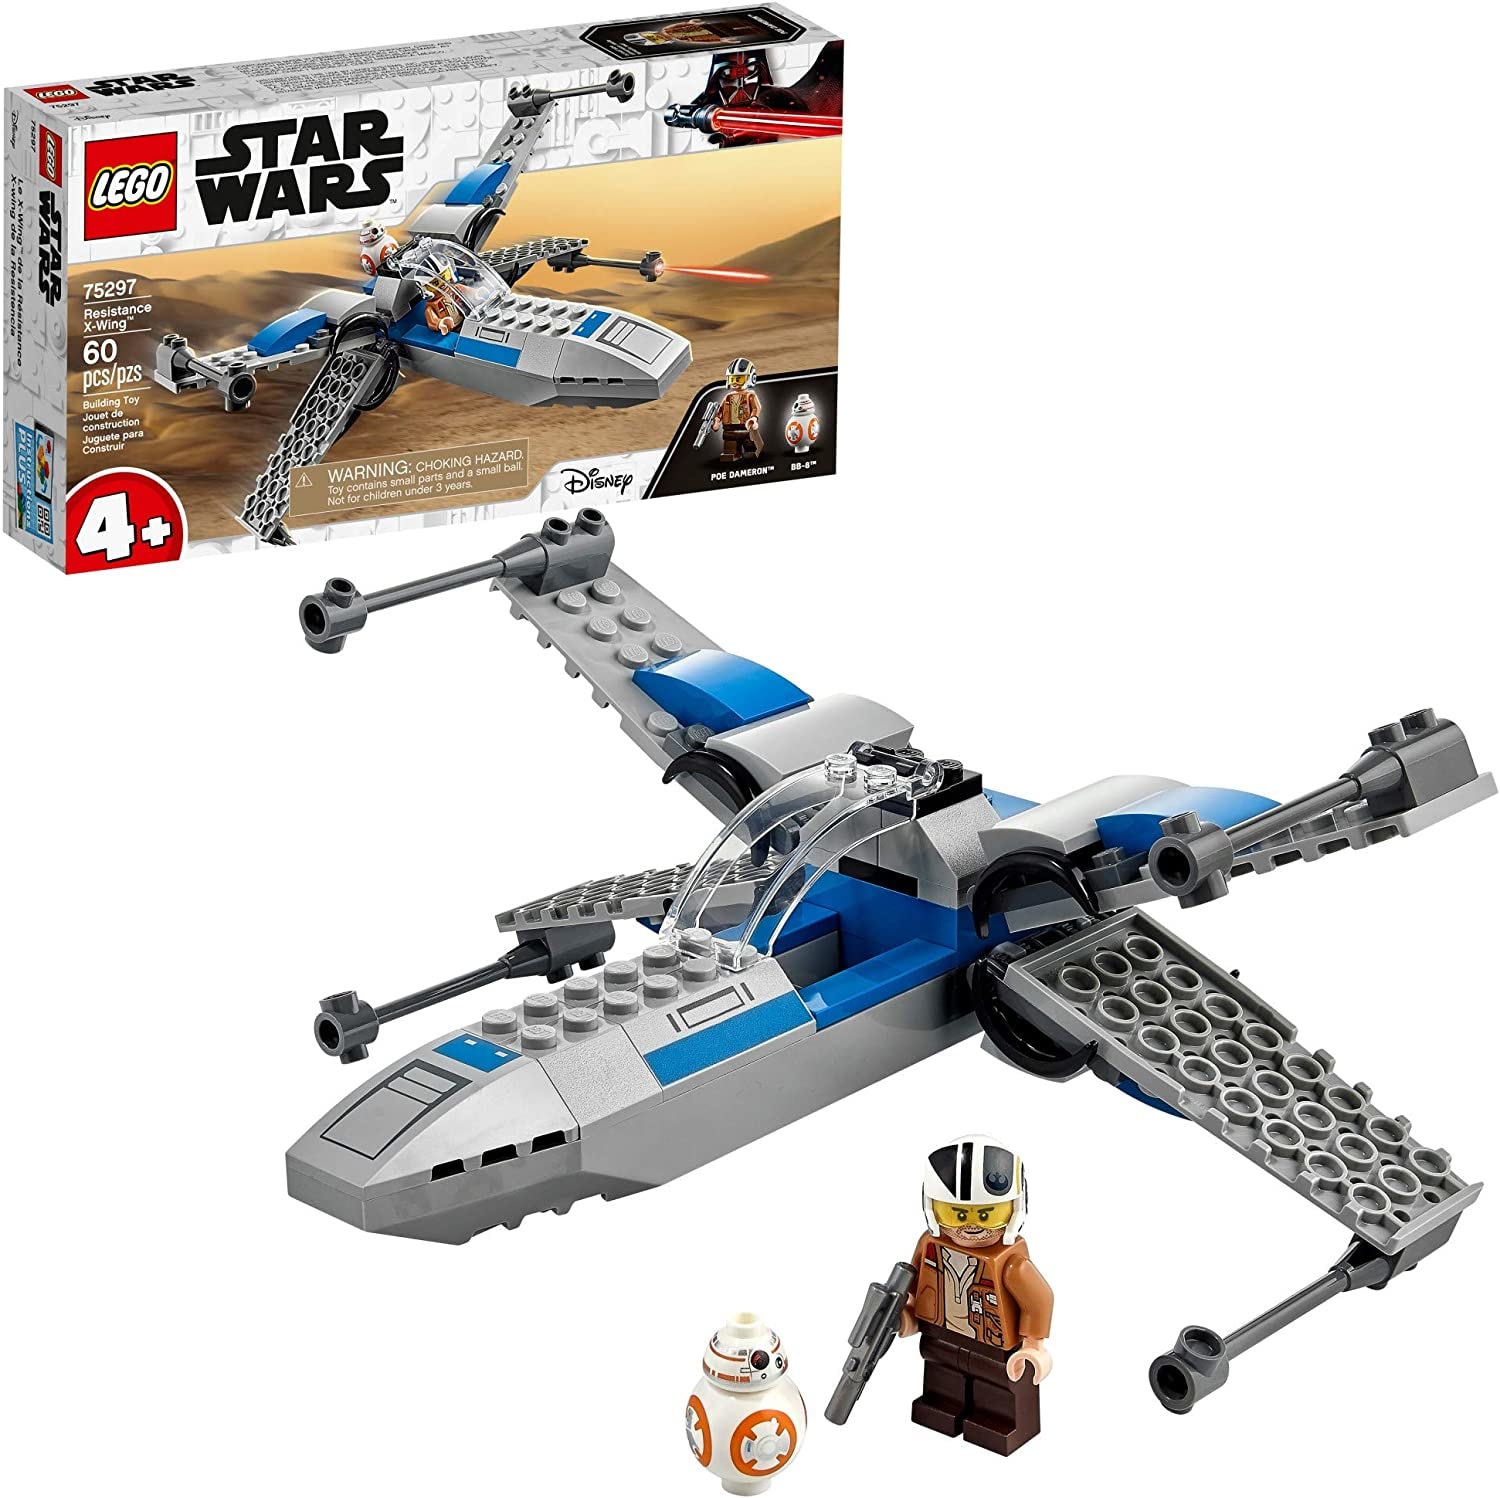 10 Of The Best Lego Sets To Give Star Wars Fans As Gifts